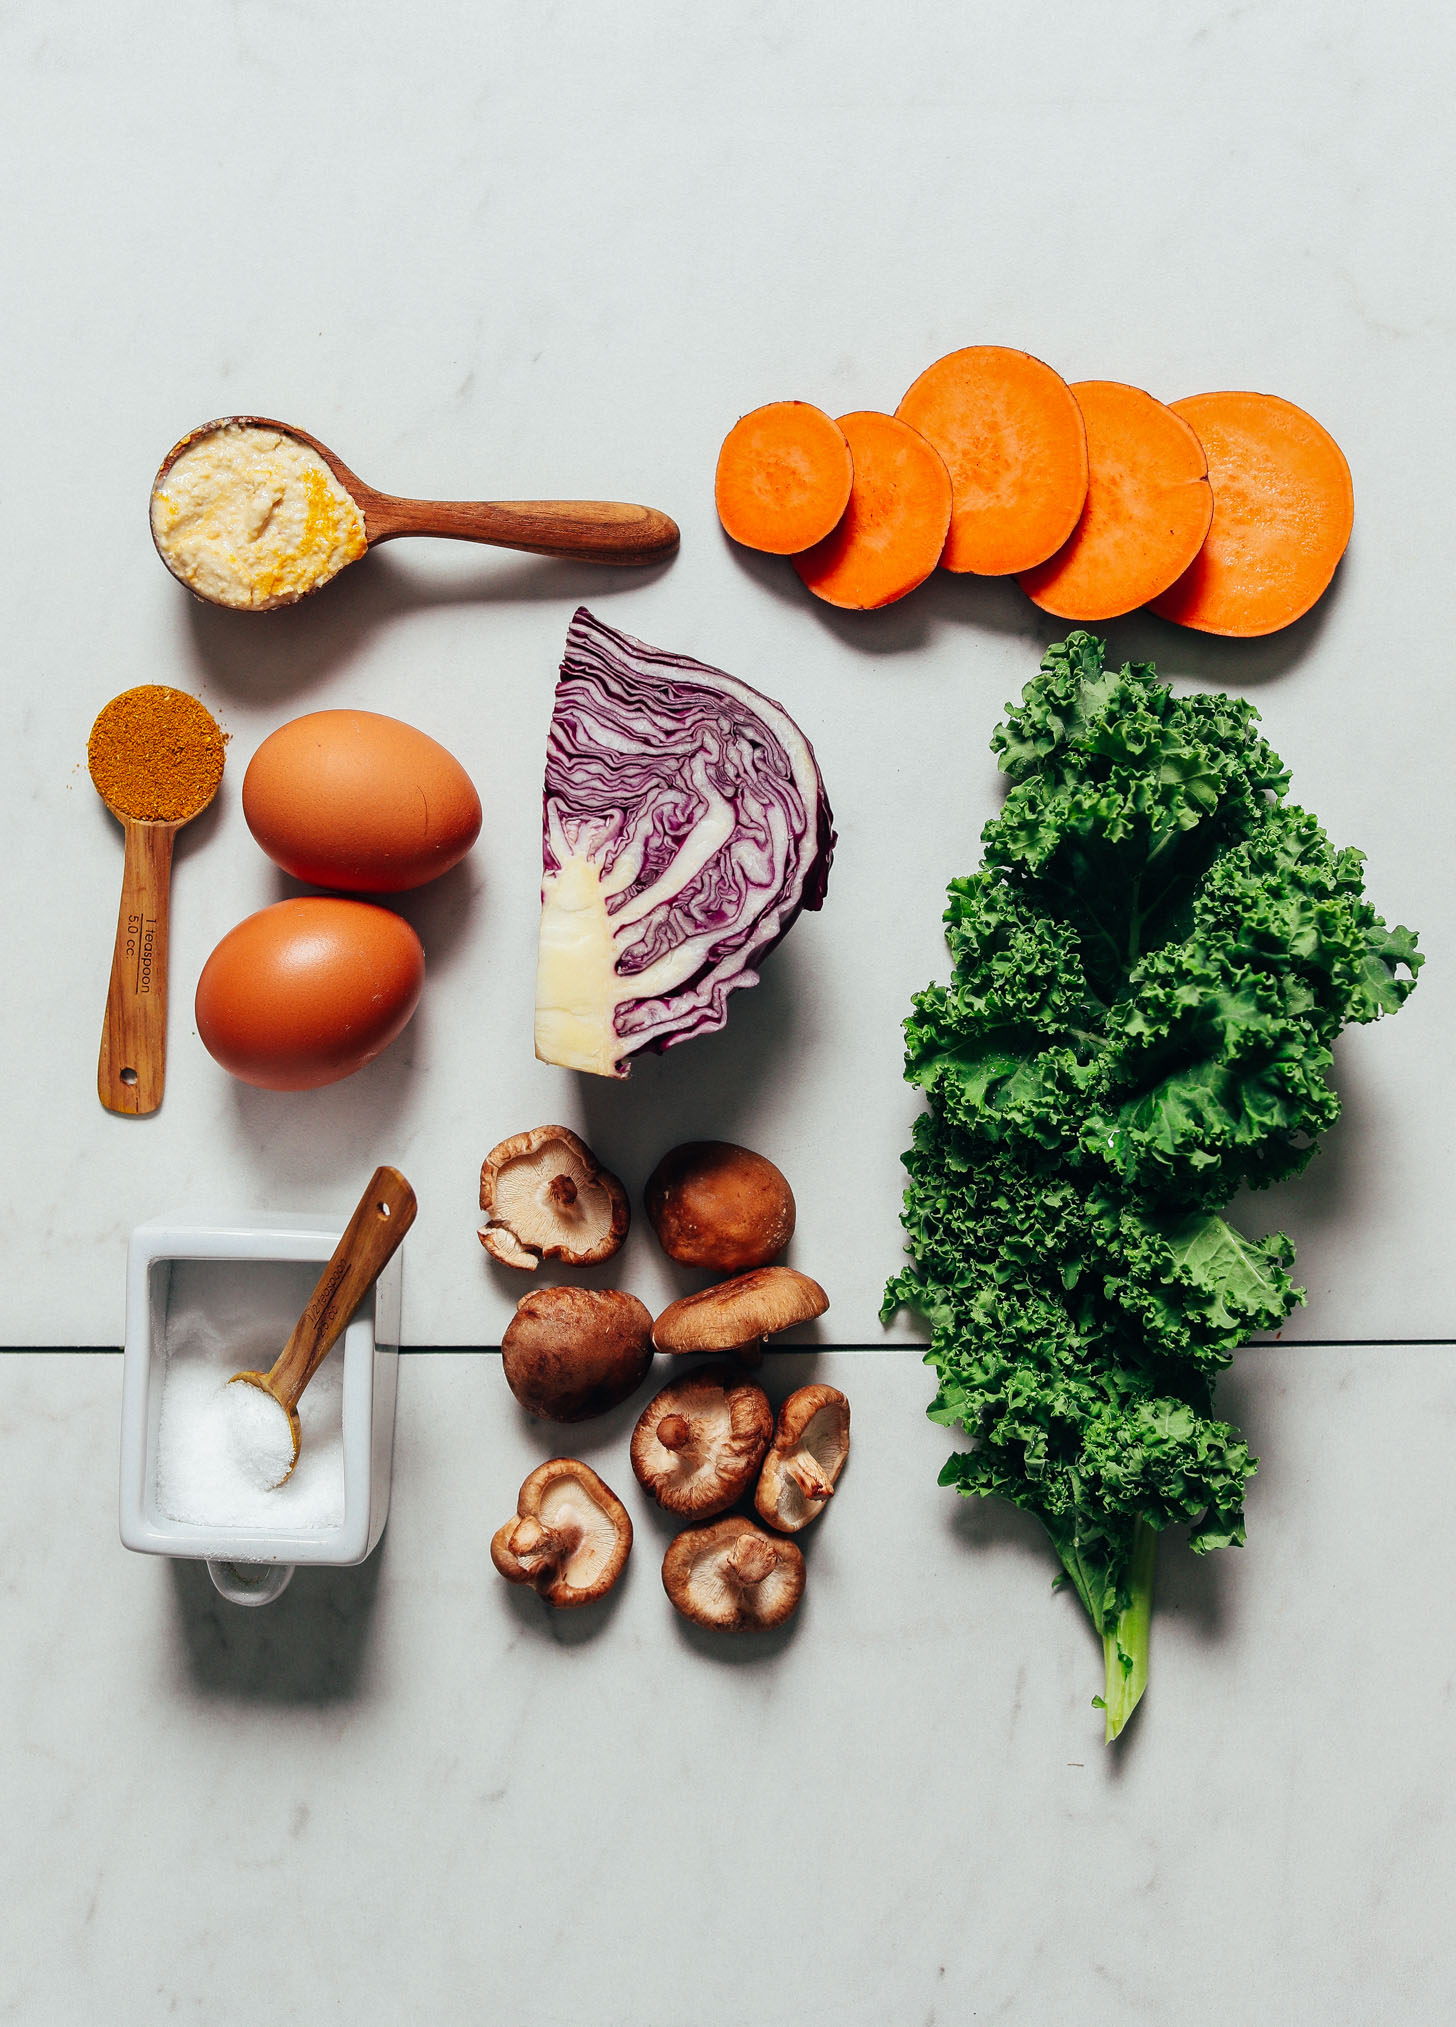 Cabbage, kale, mushrooms, sweet potato, eggs, and other ingredients for making Simple But Good Breakfast Bowls